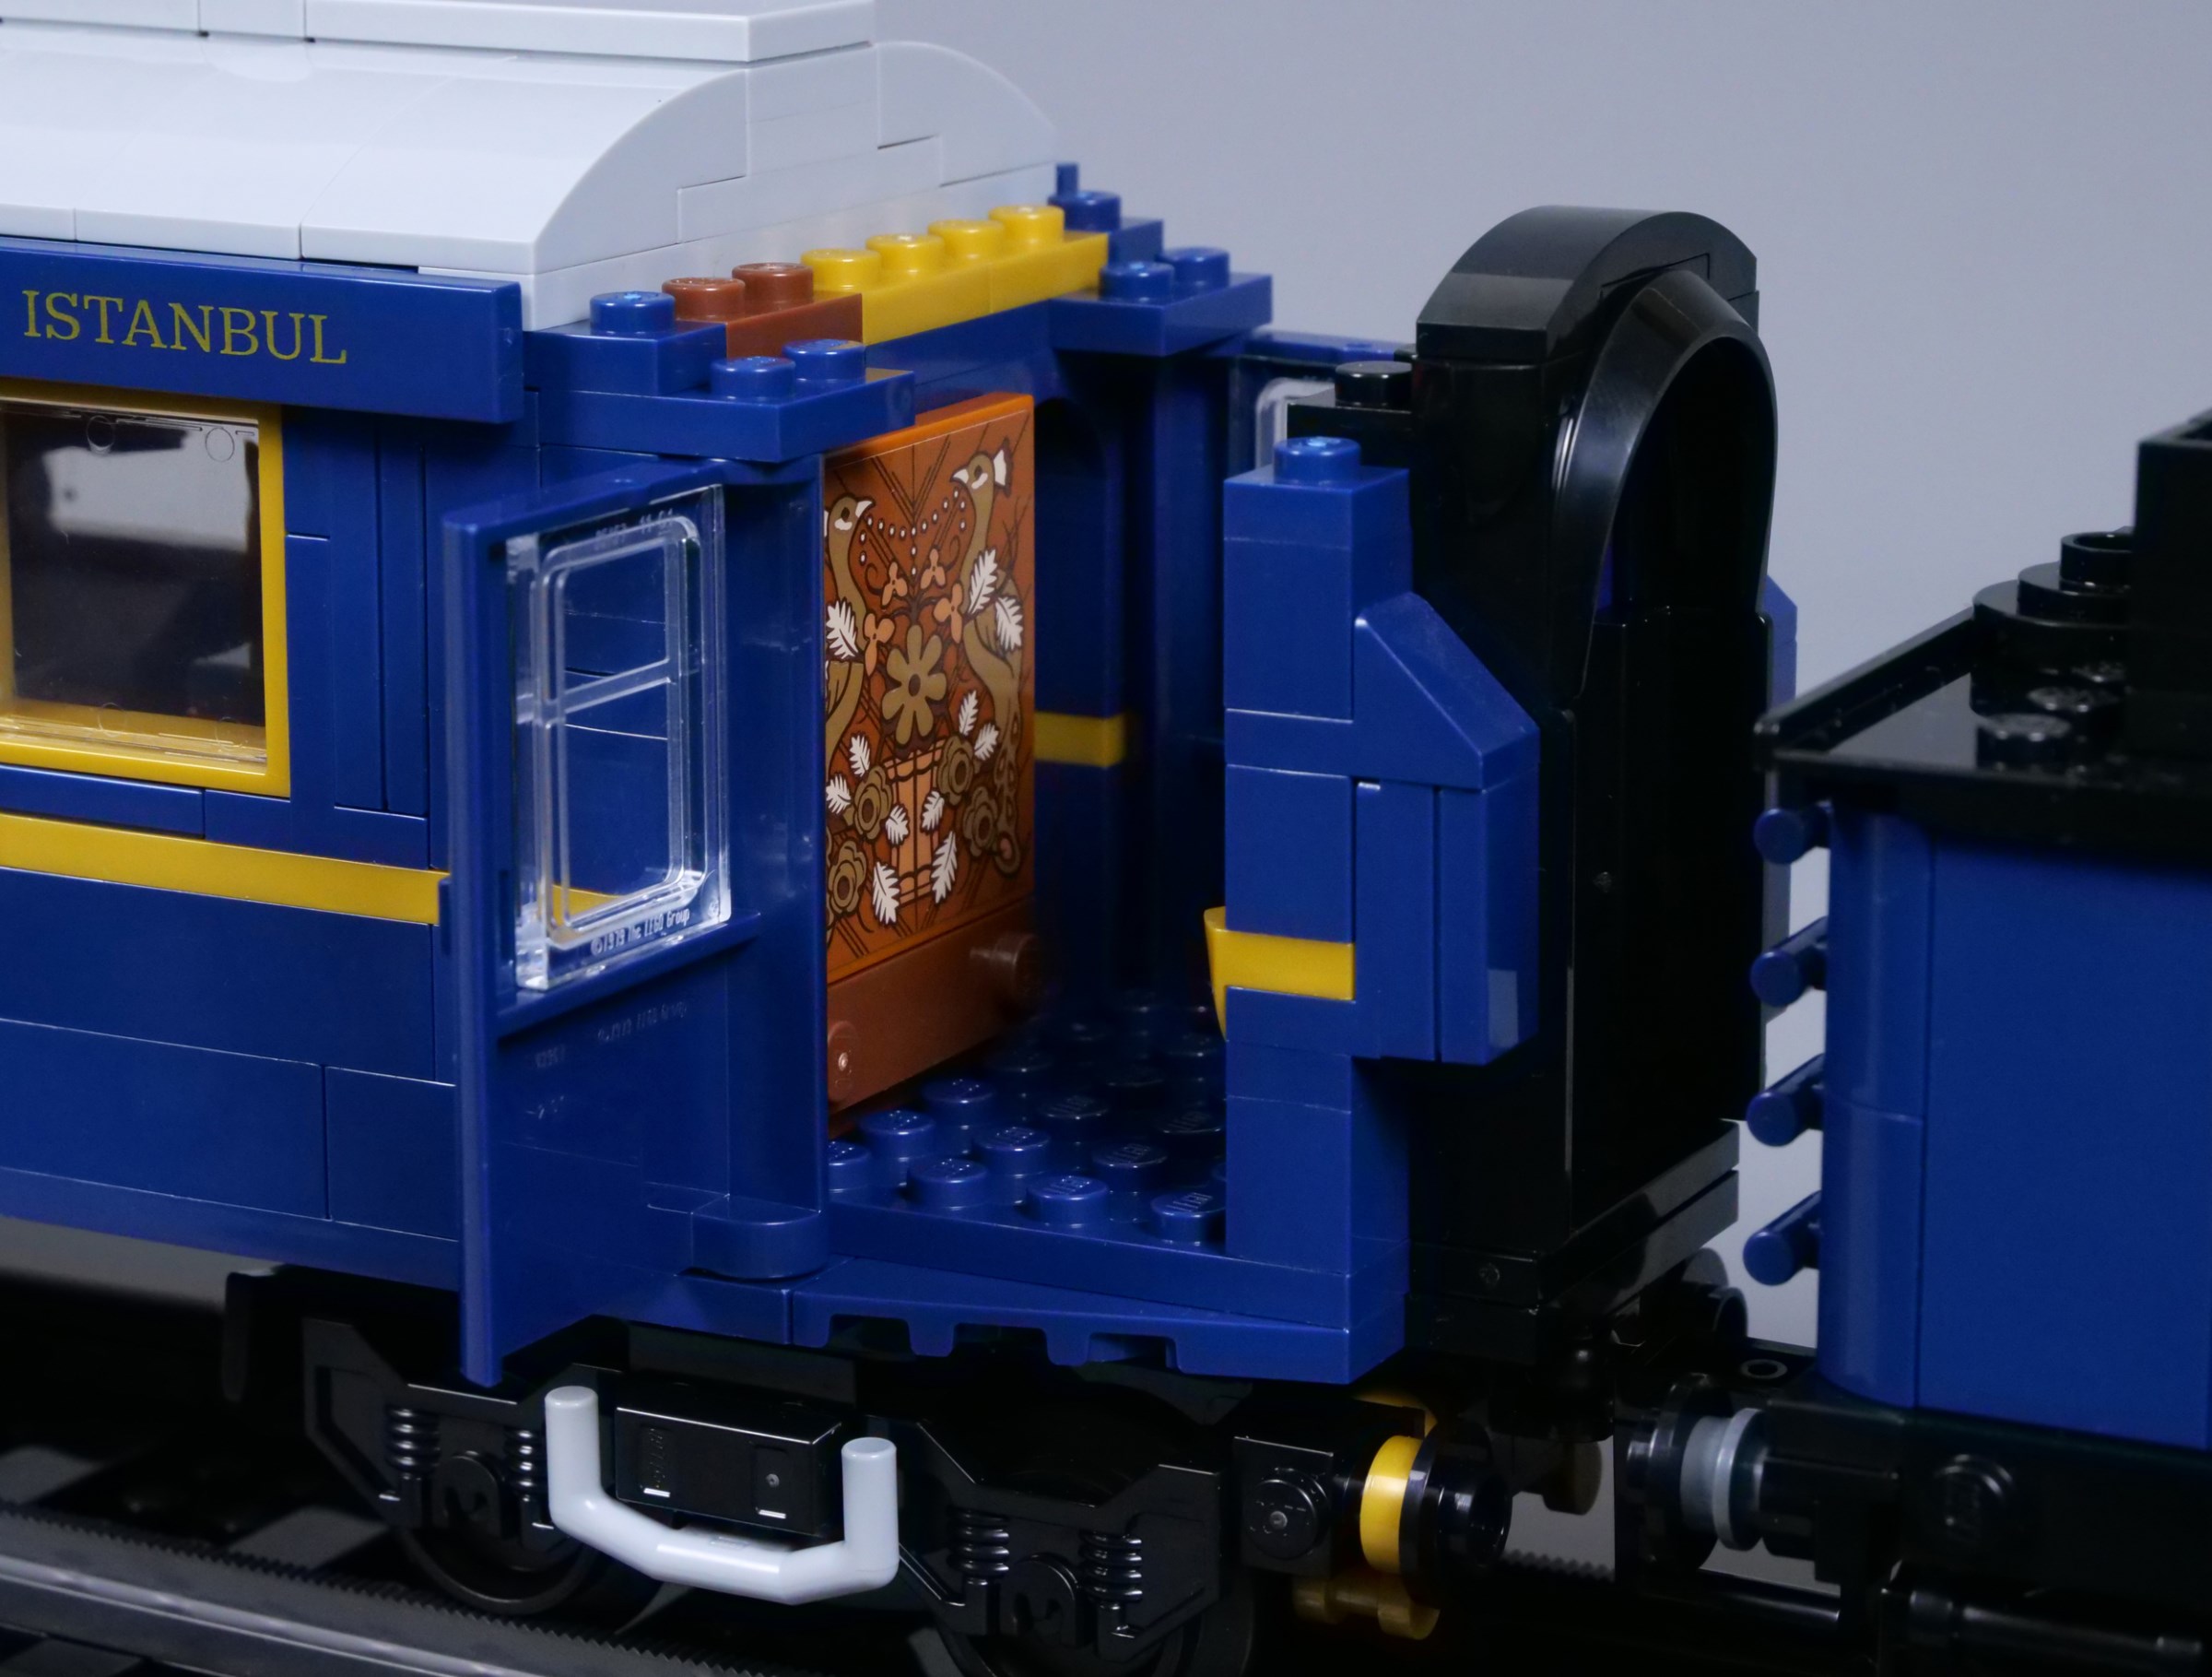 LEGO Orient Express Train is officially rolling into the station